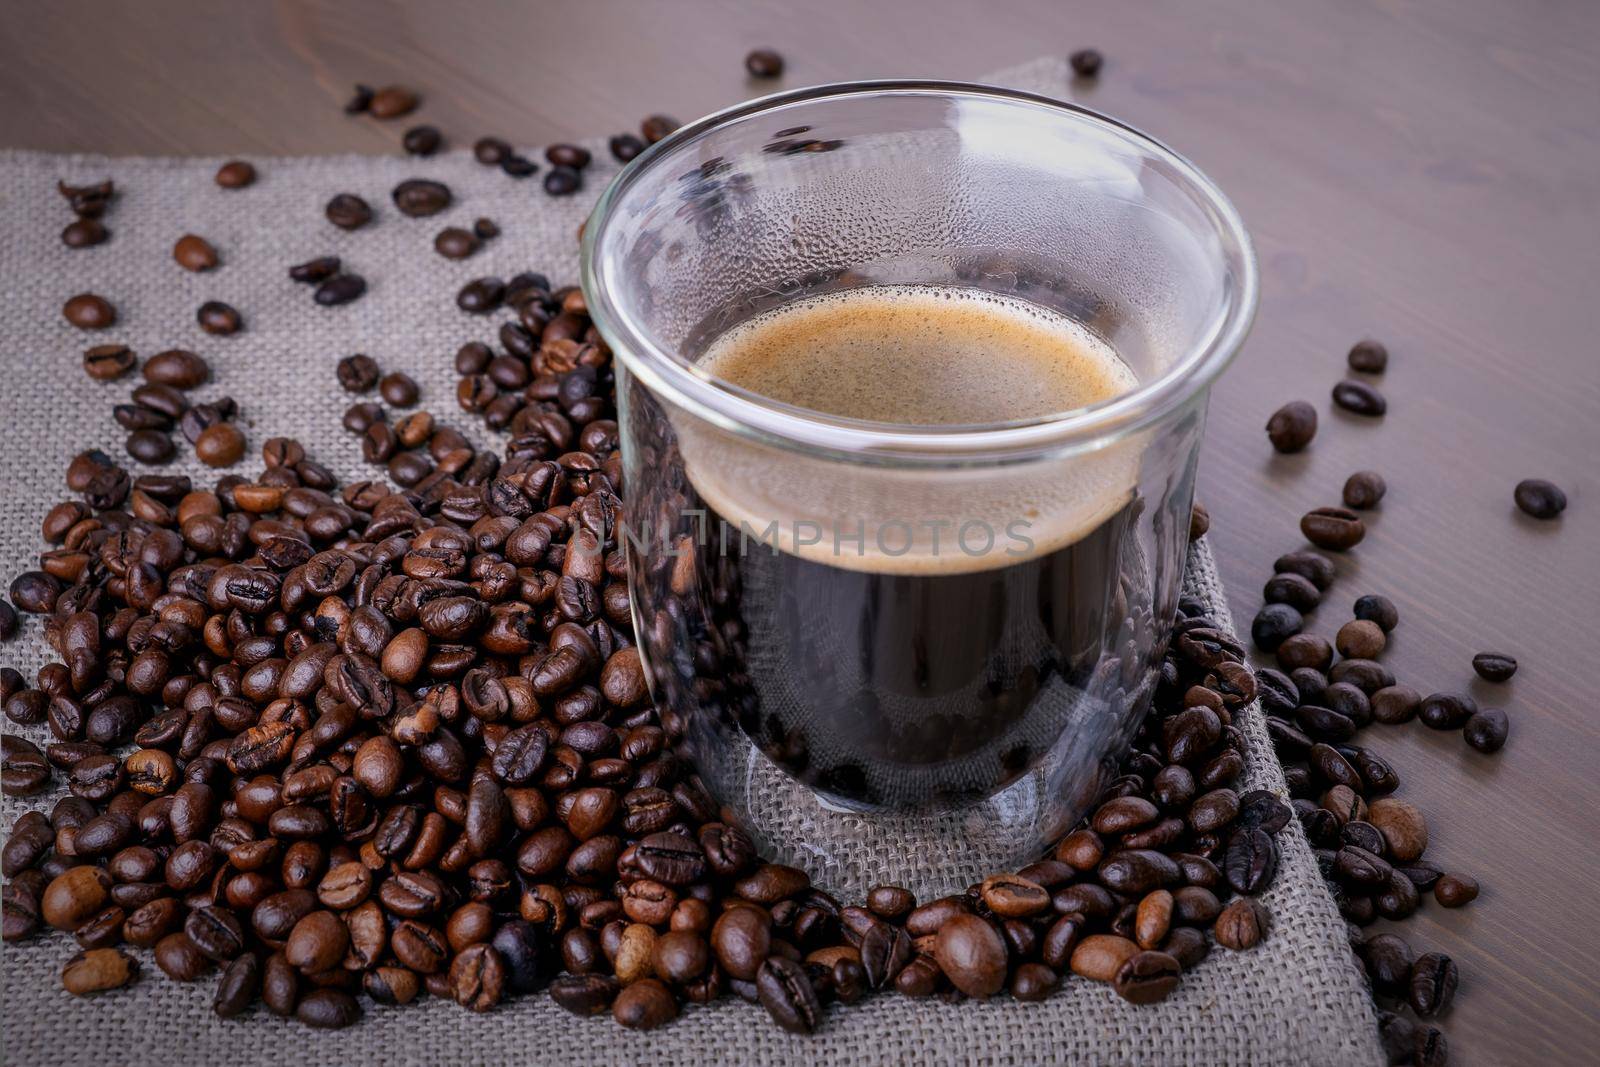 Close-up of glass cup with coffee and pile of roasted coffee beans on piece of burlap on wooden surface. Heat-resistant coffee glass with double walls on table. Selective focus.